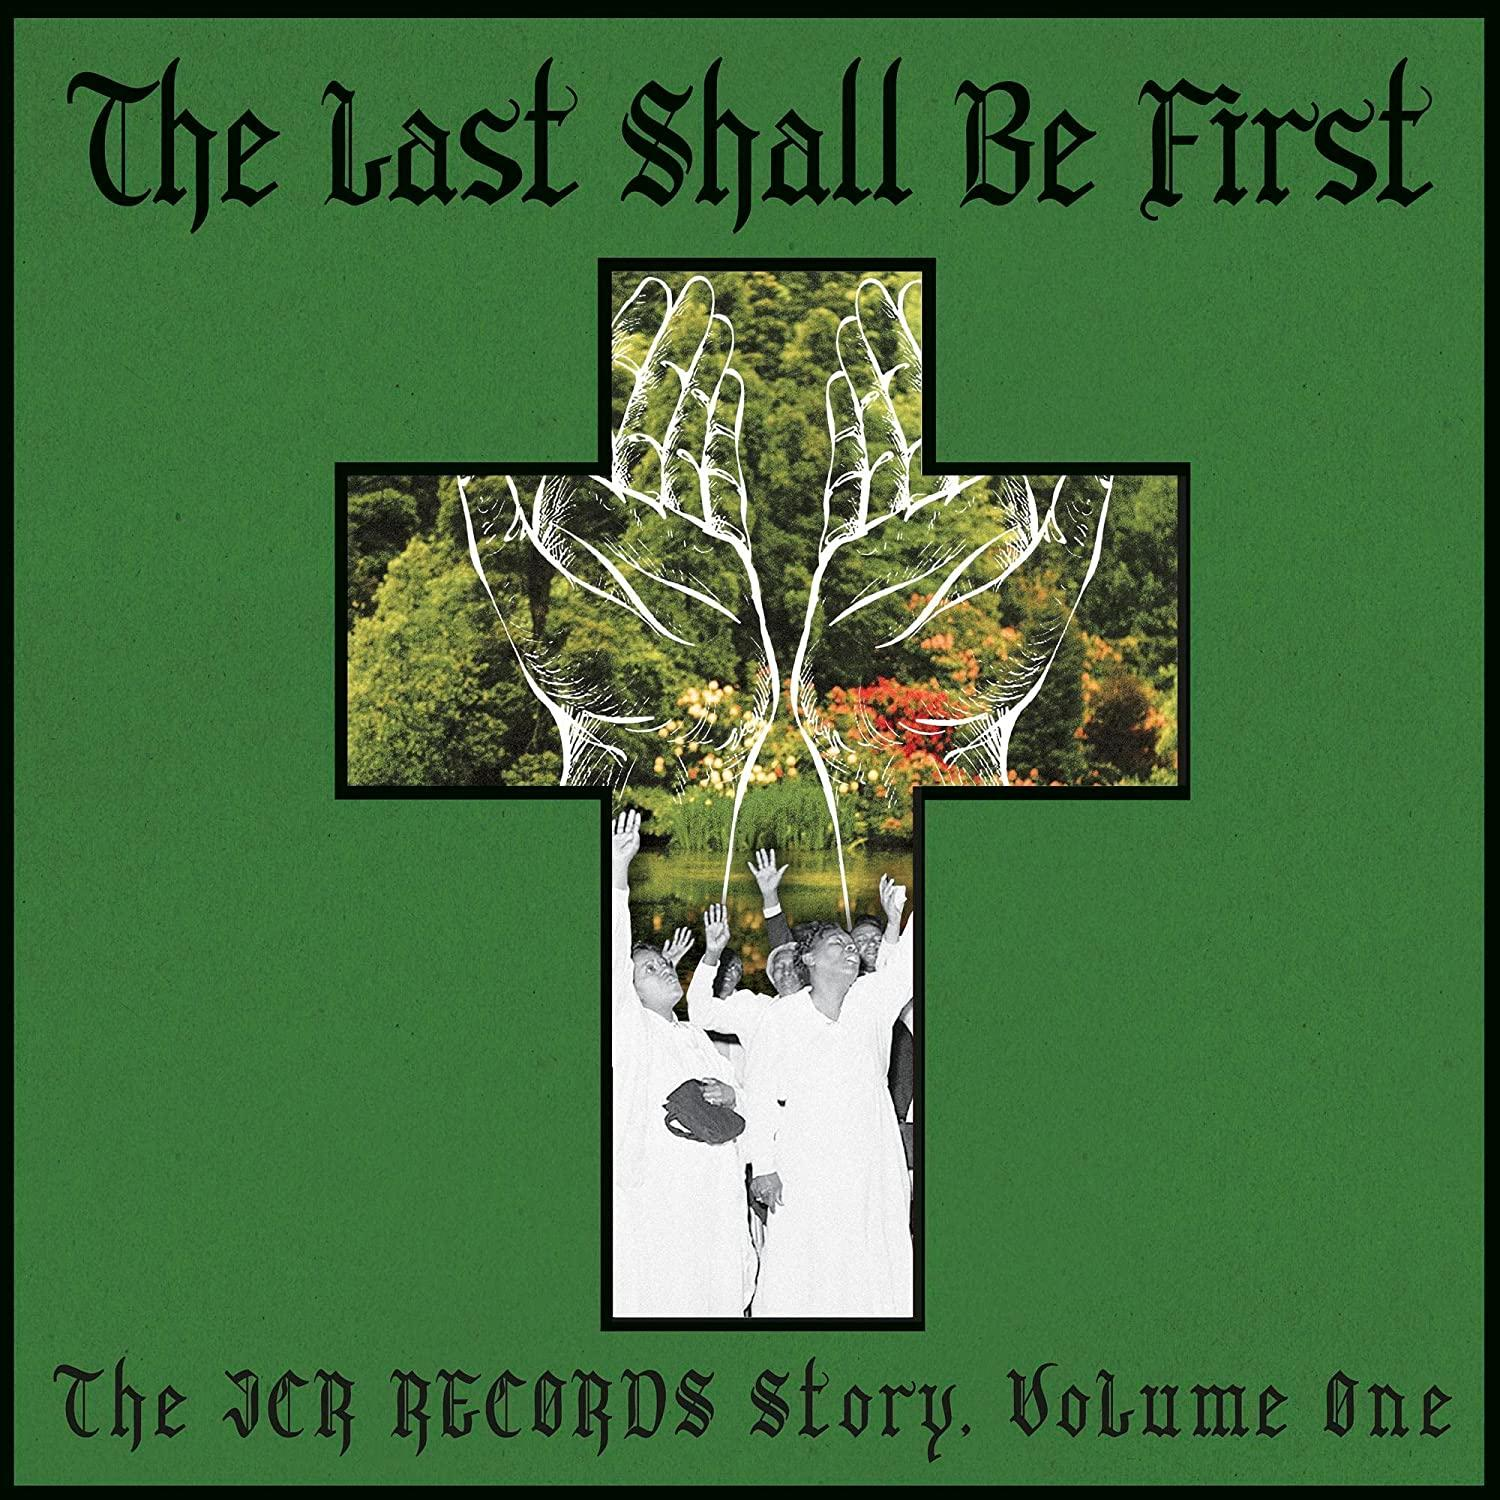 RECORDS THE (CD) FIRST: - LAST JCR STORY VARIOUS BE - SHALL